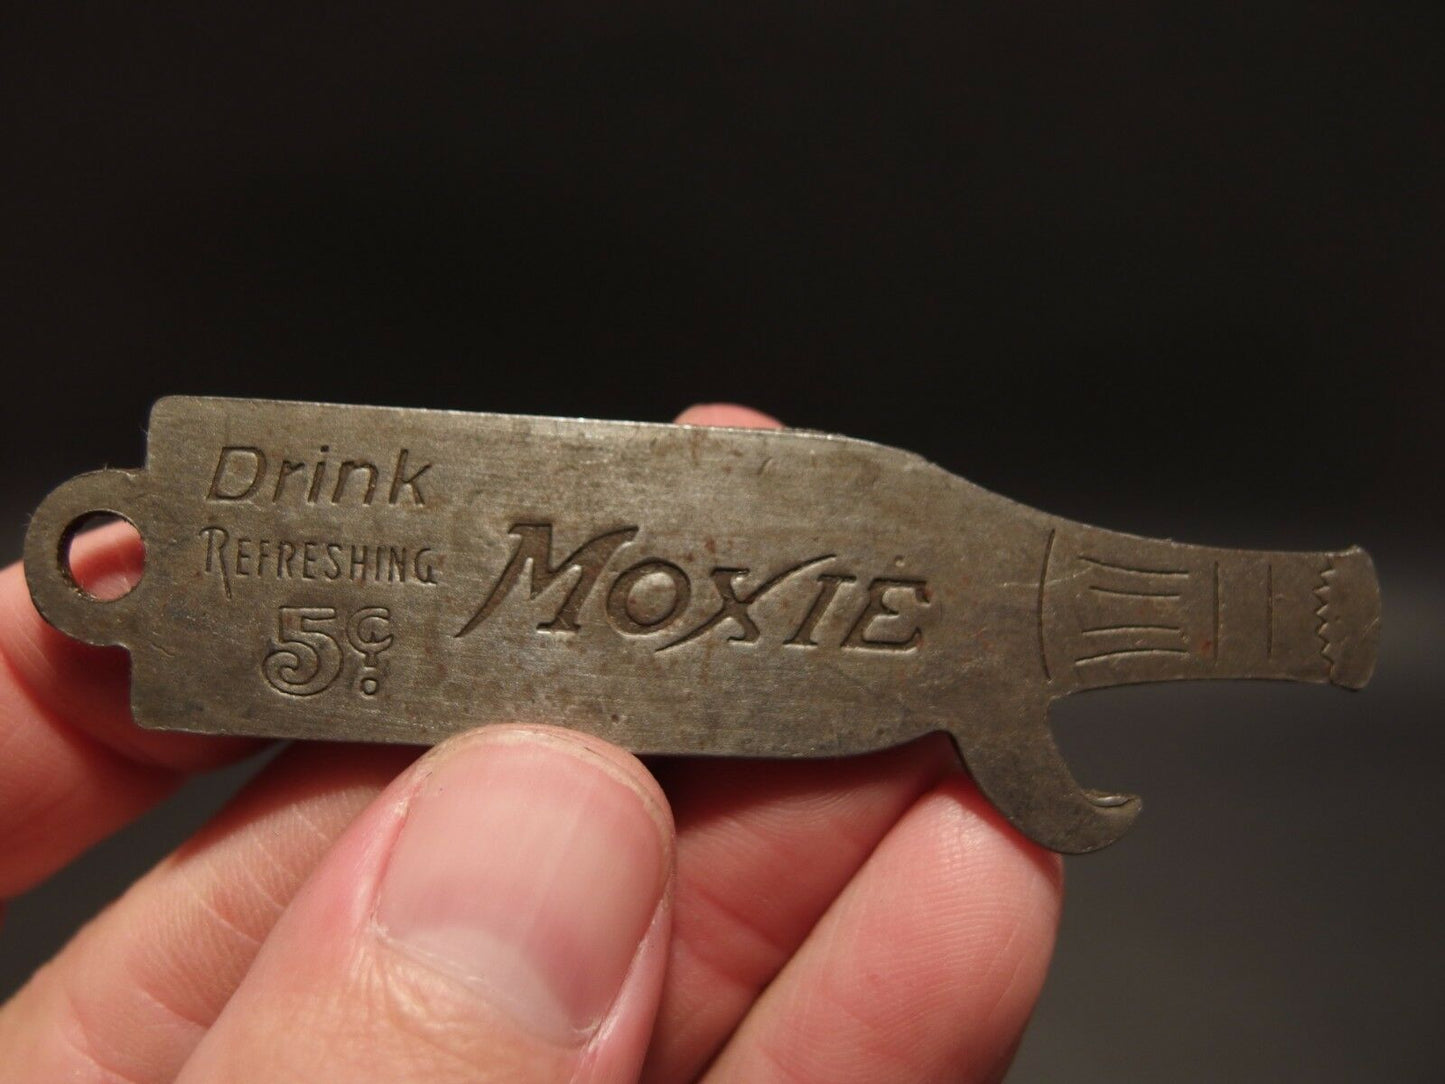 Antique Vintage Style Moxie Bottle Opener - Early Home Decor